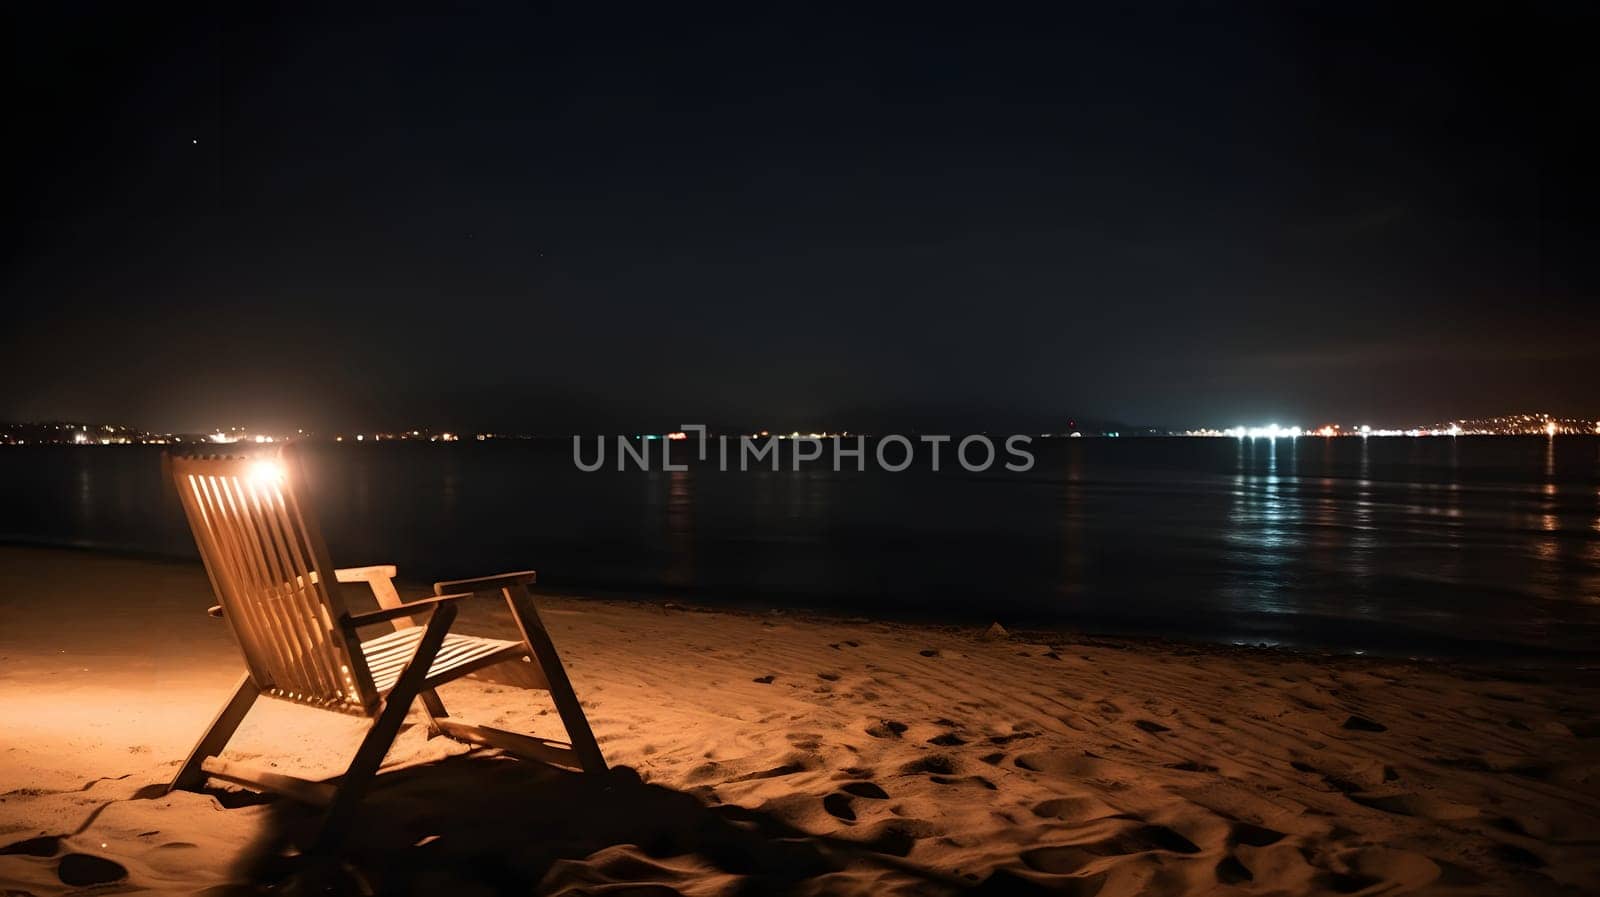 Vacant wooden beach chair on sand beach at night - summer vacation theme, neural network generated art by z1b